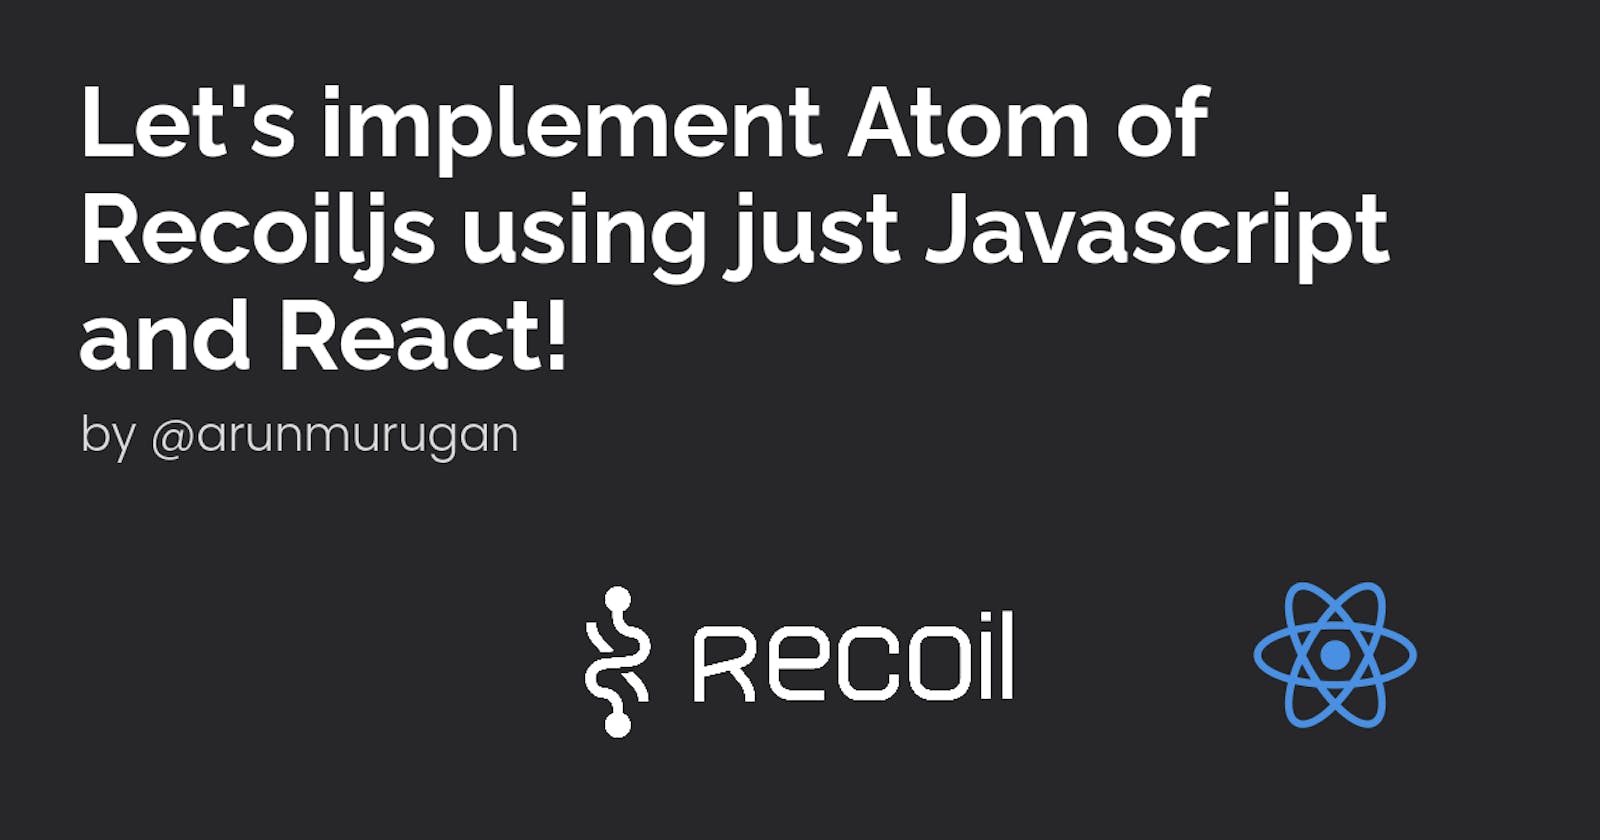 Let's implement Atom of Recoil using just Javascript and React!